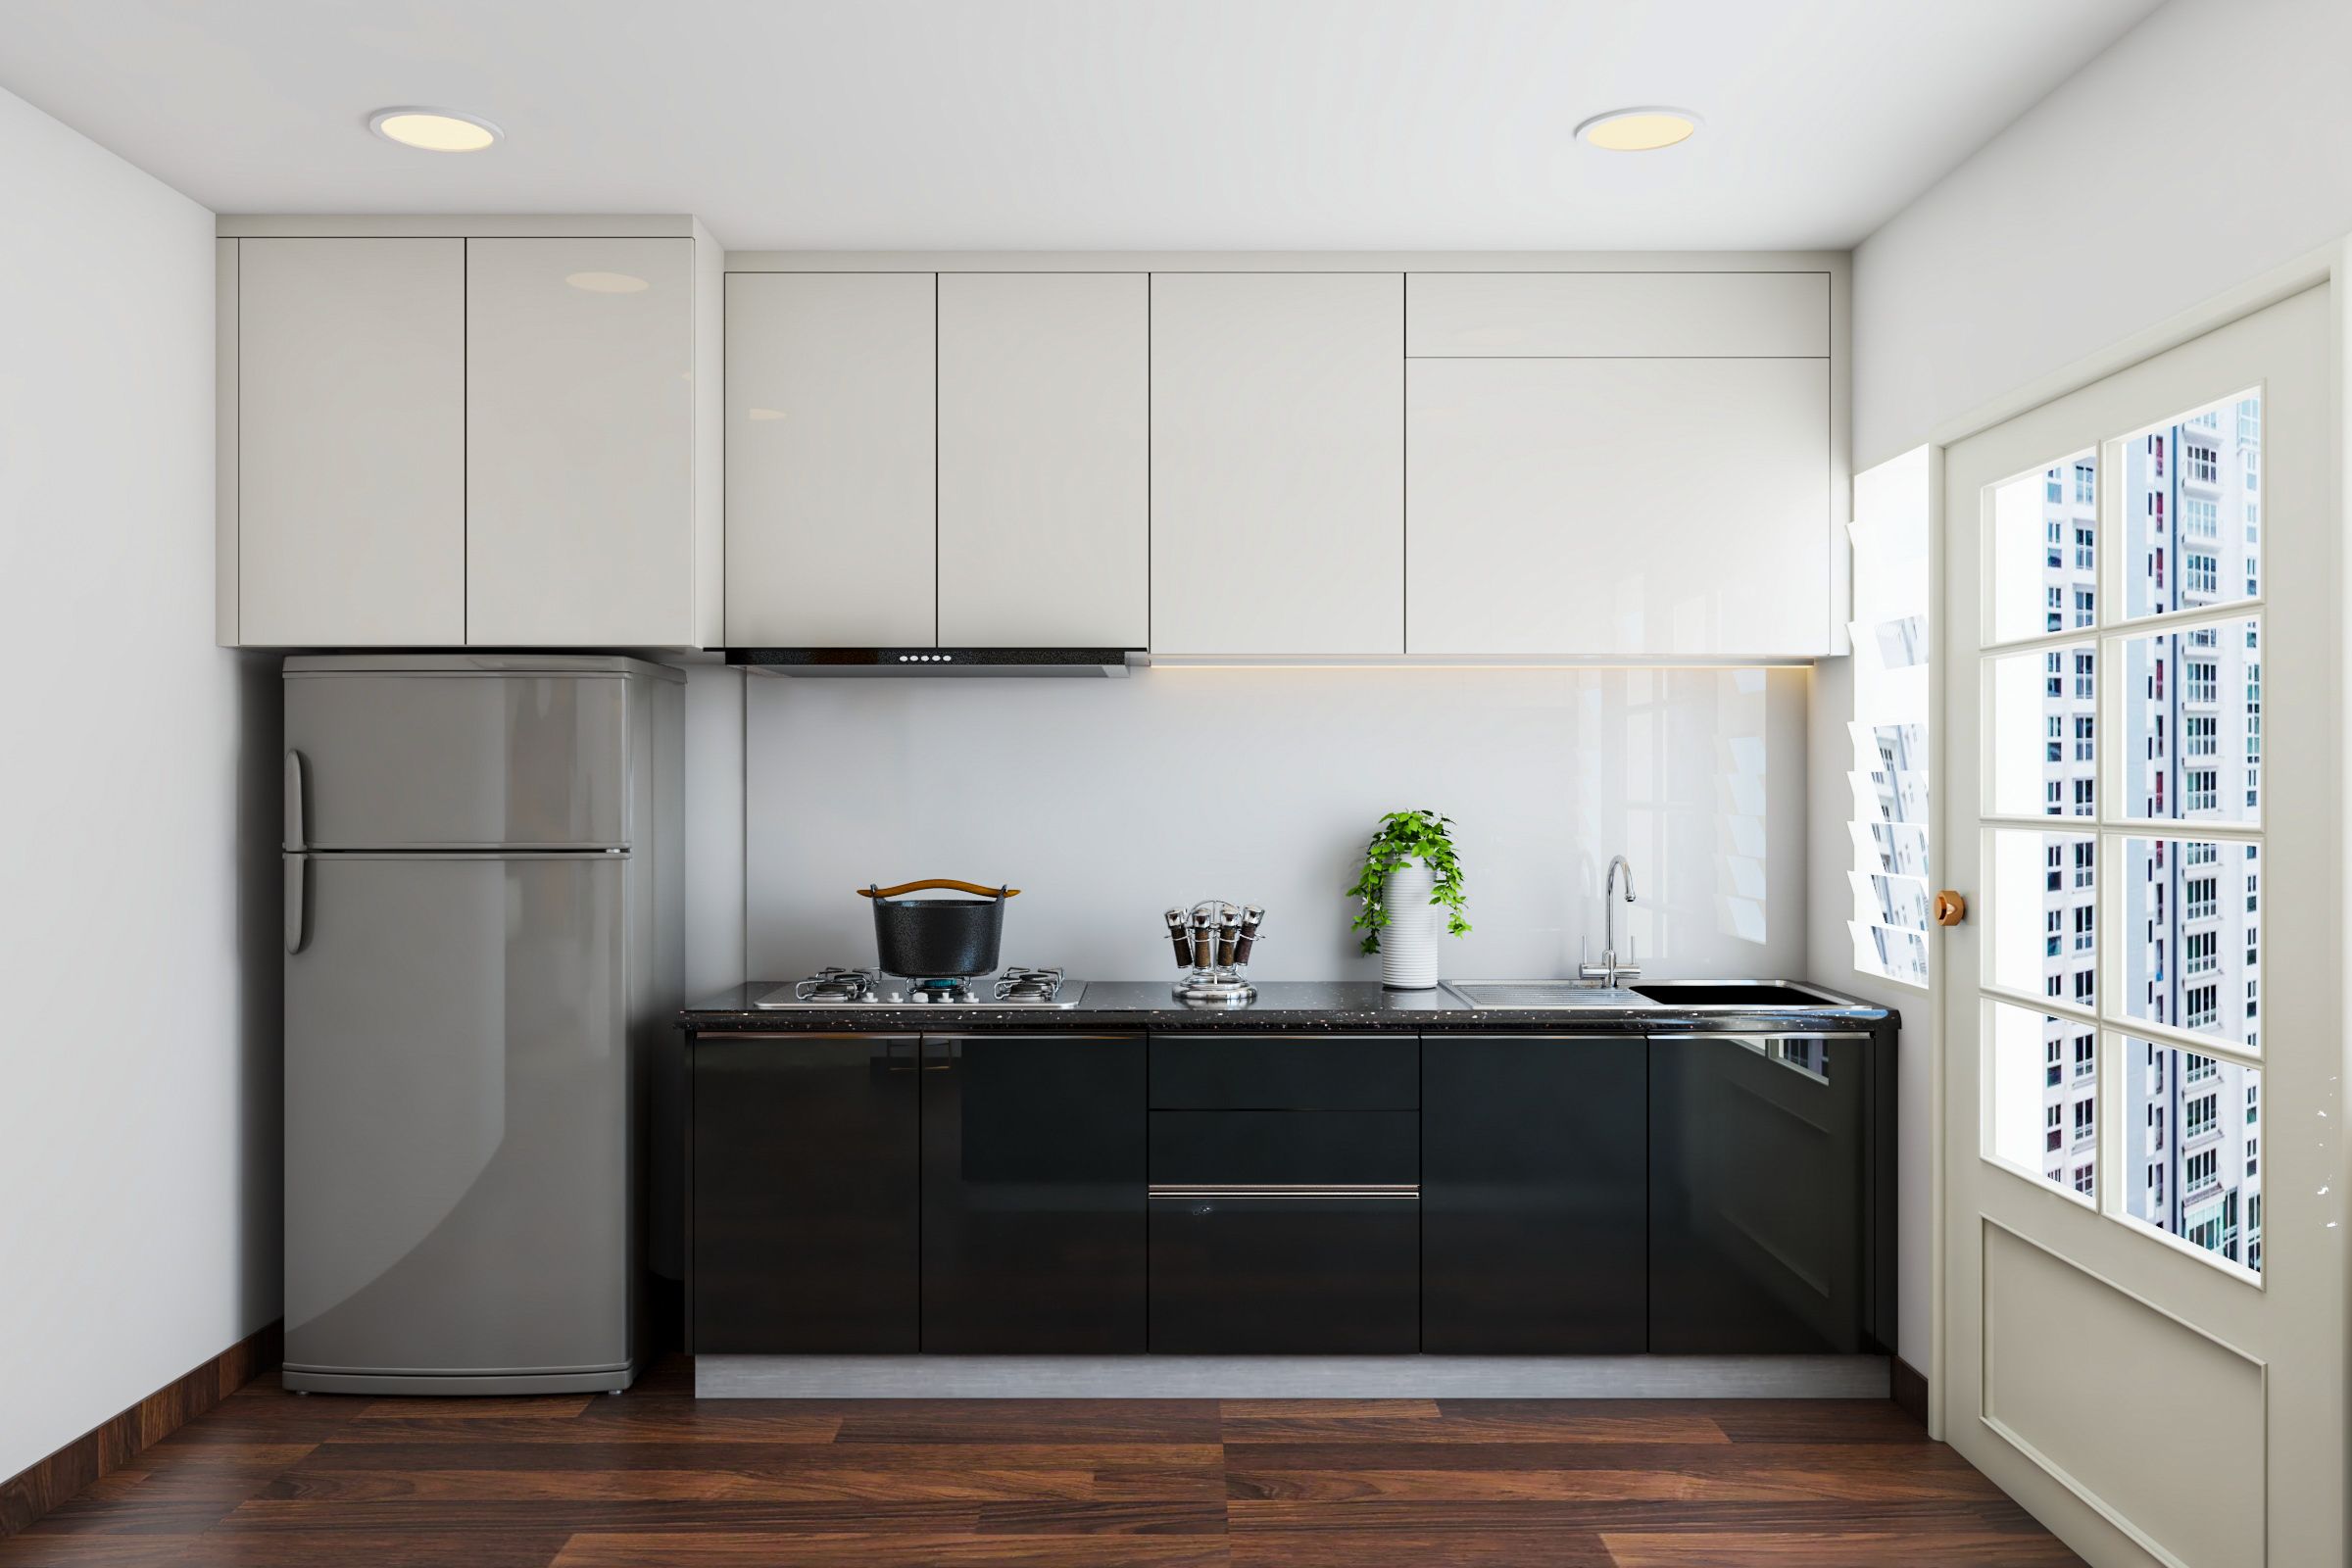 Modern Spacious Kitchen Cabinet Designed For Rental Homes